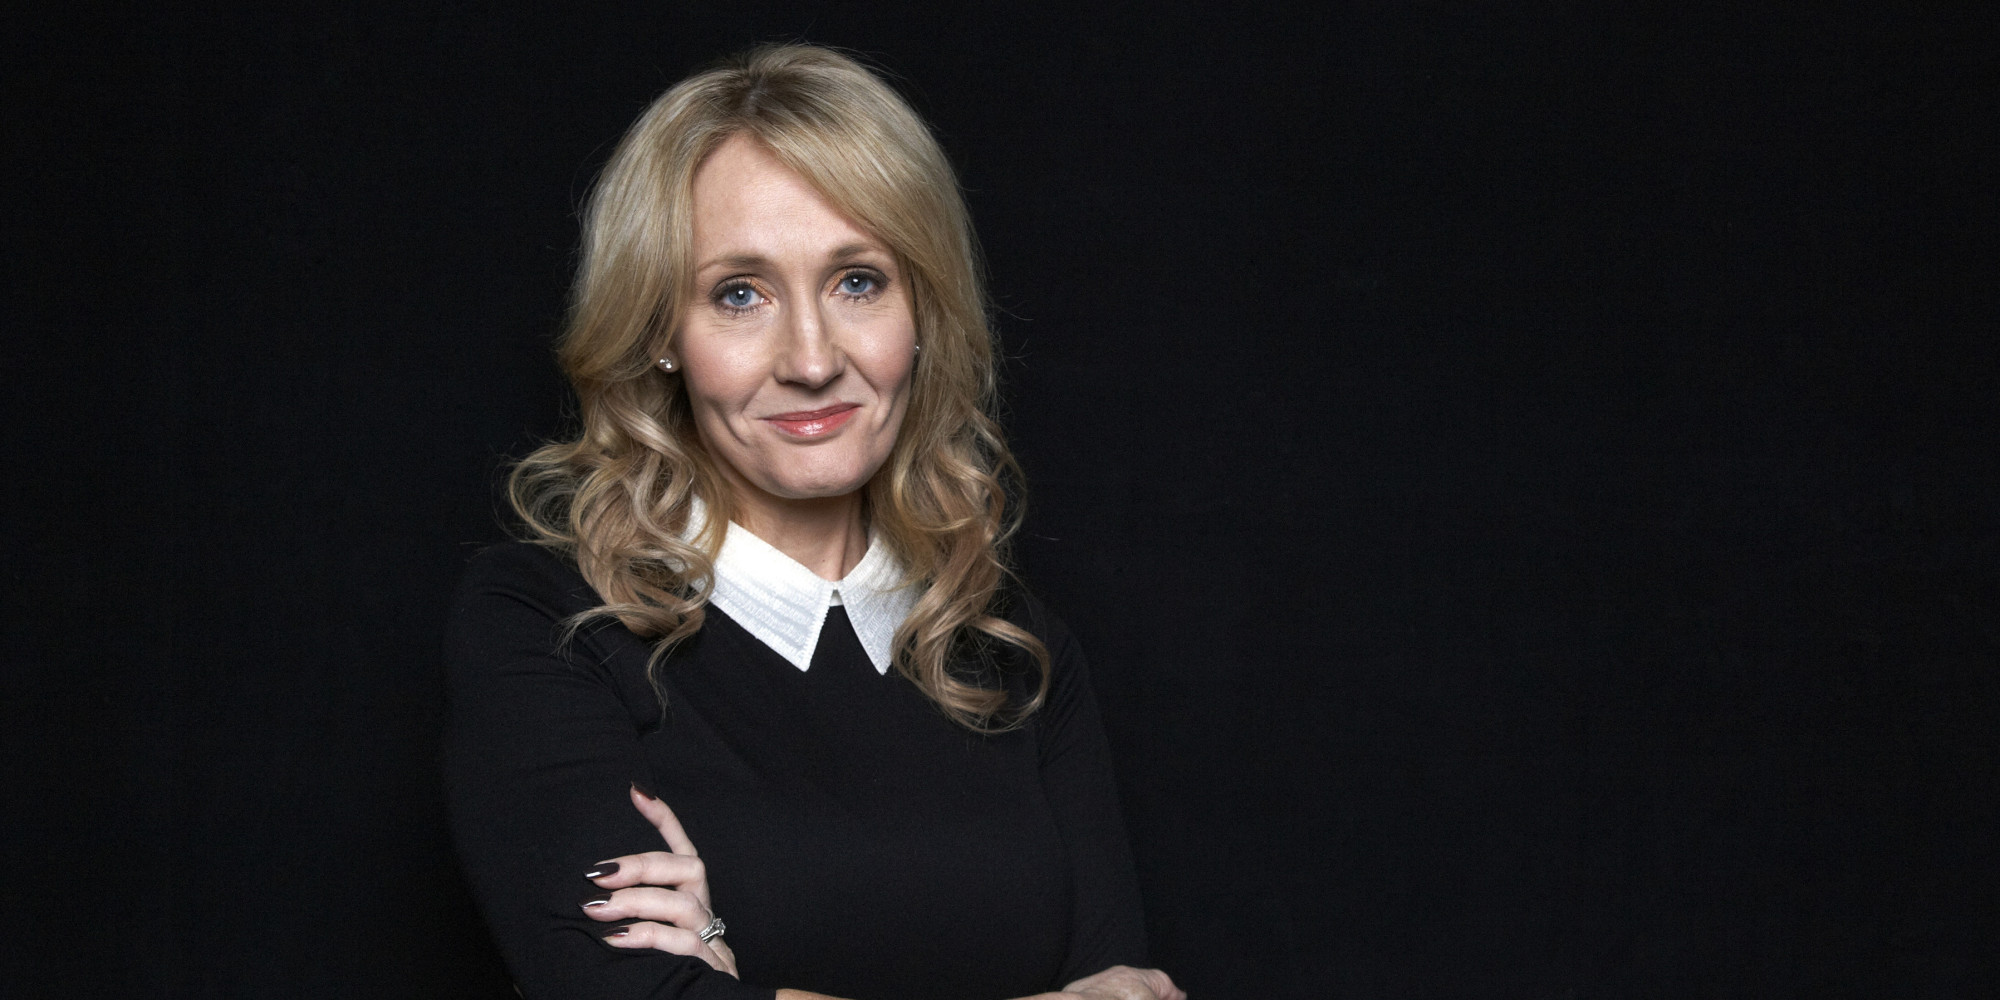 JK Rowling's commandments against sexist insults